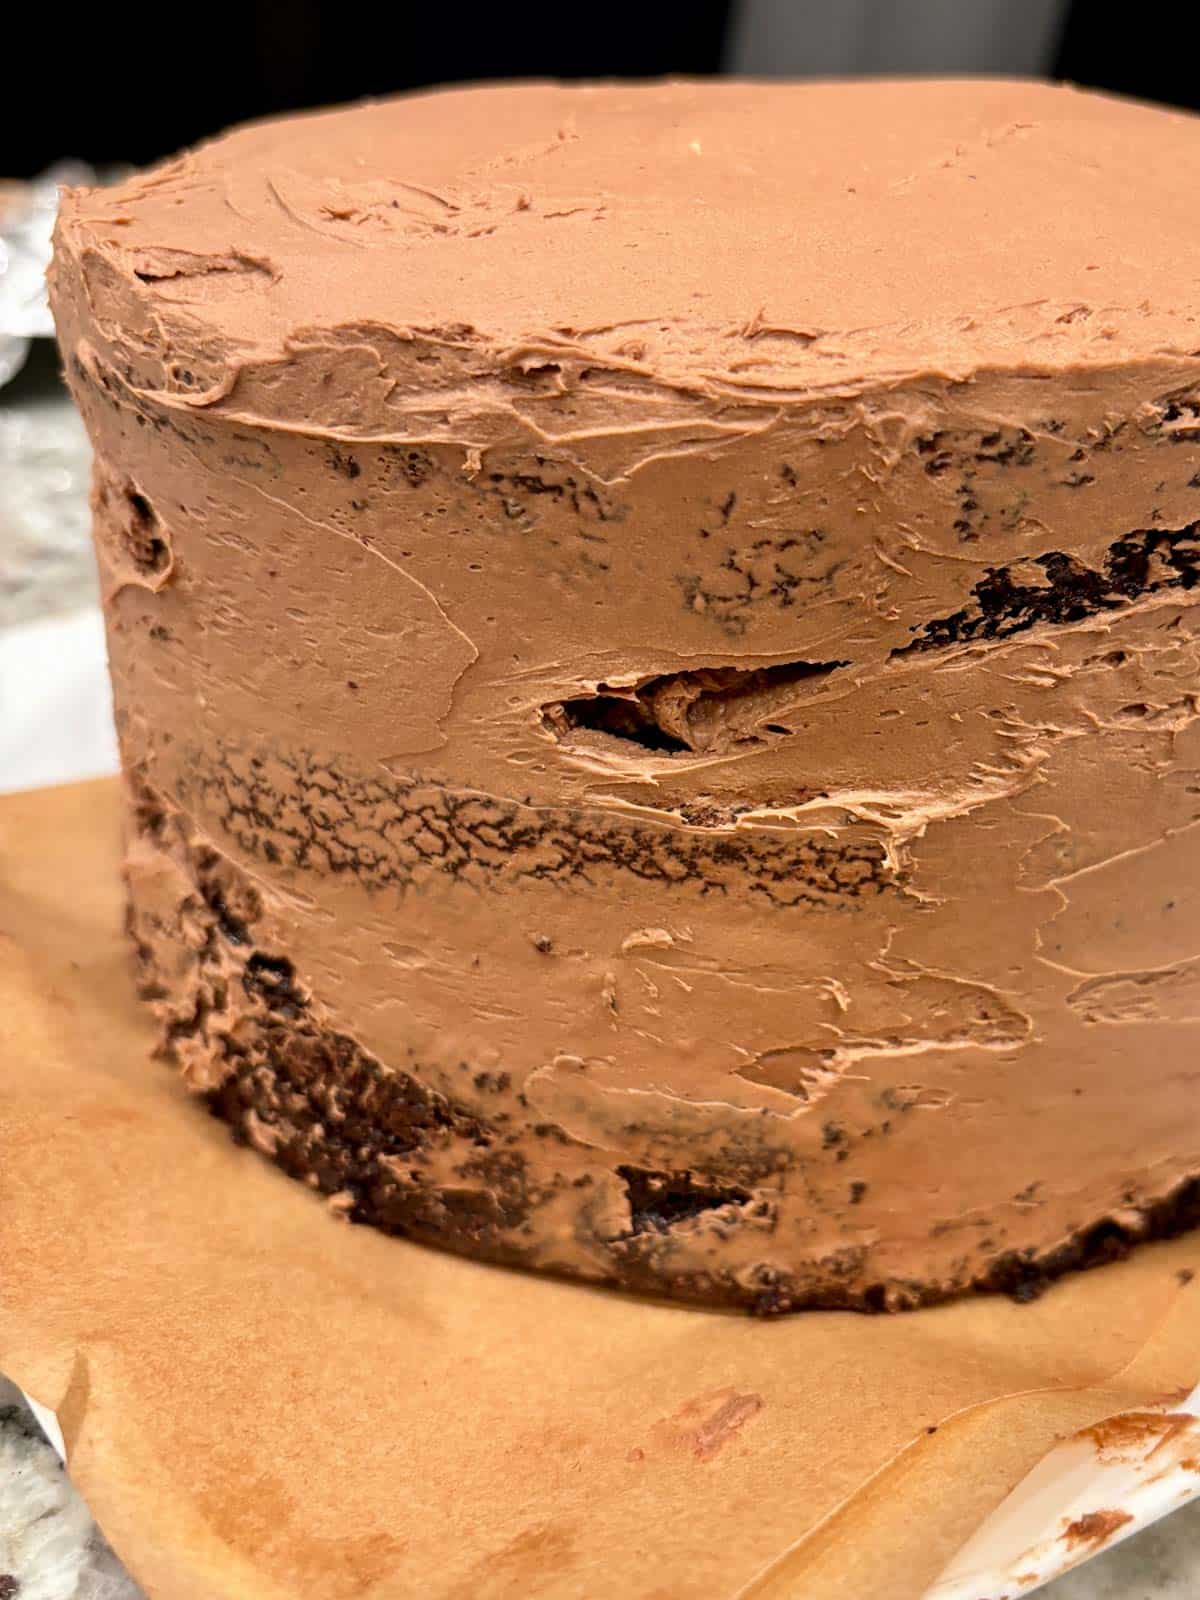 Three layers of chocolate cake with a crumb coat of chocolate mousse.